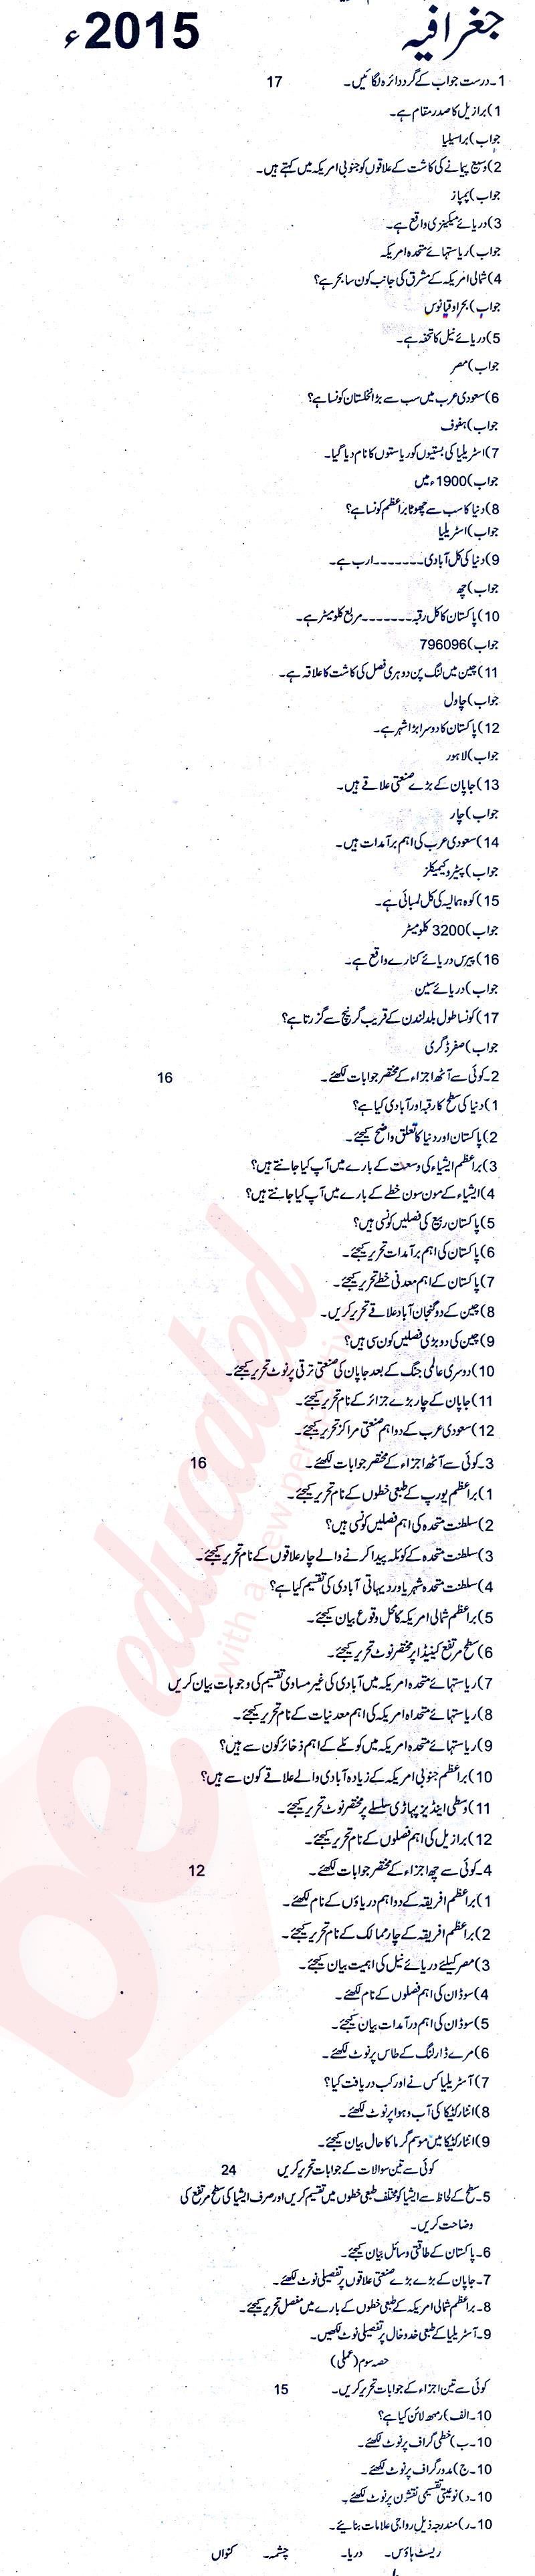 Commercial Geography FA Part 2 Past Paper Group 1 BISE Rawalpindi 2015